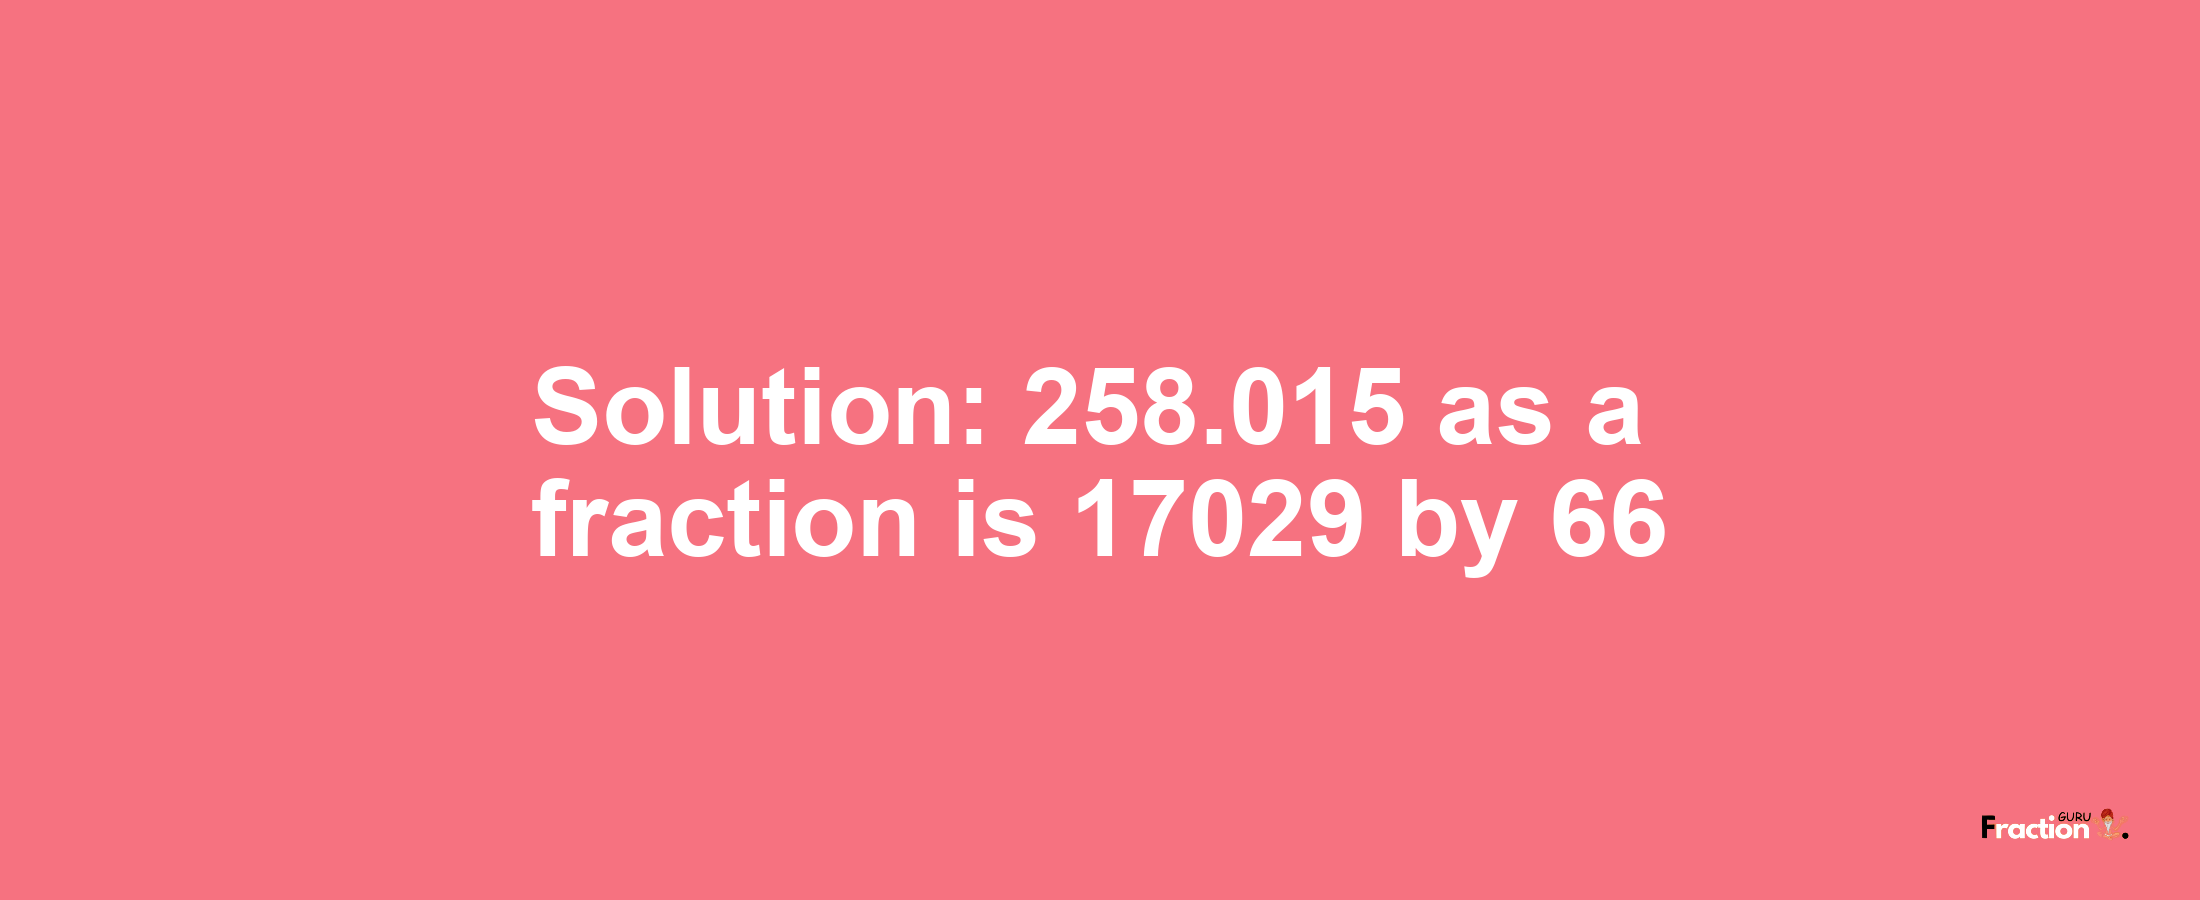 Solution:258.015 as a fraction is 17029/66